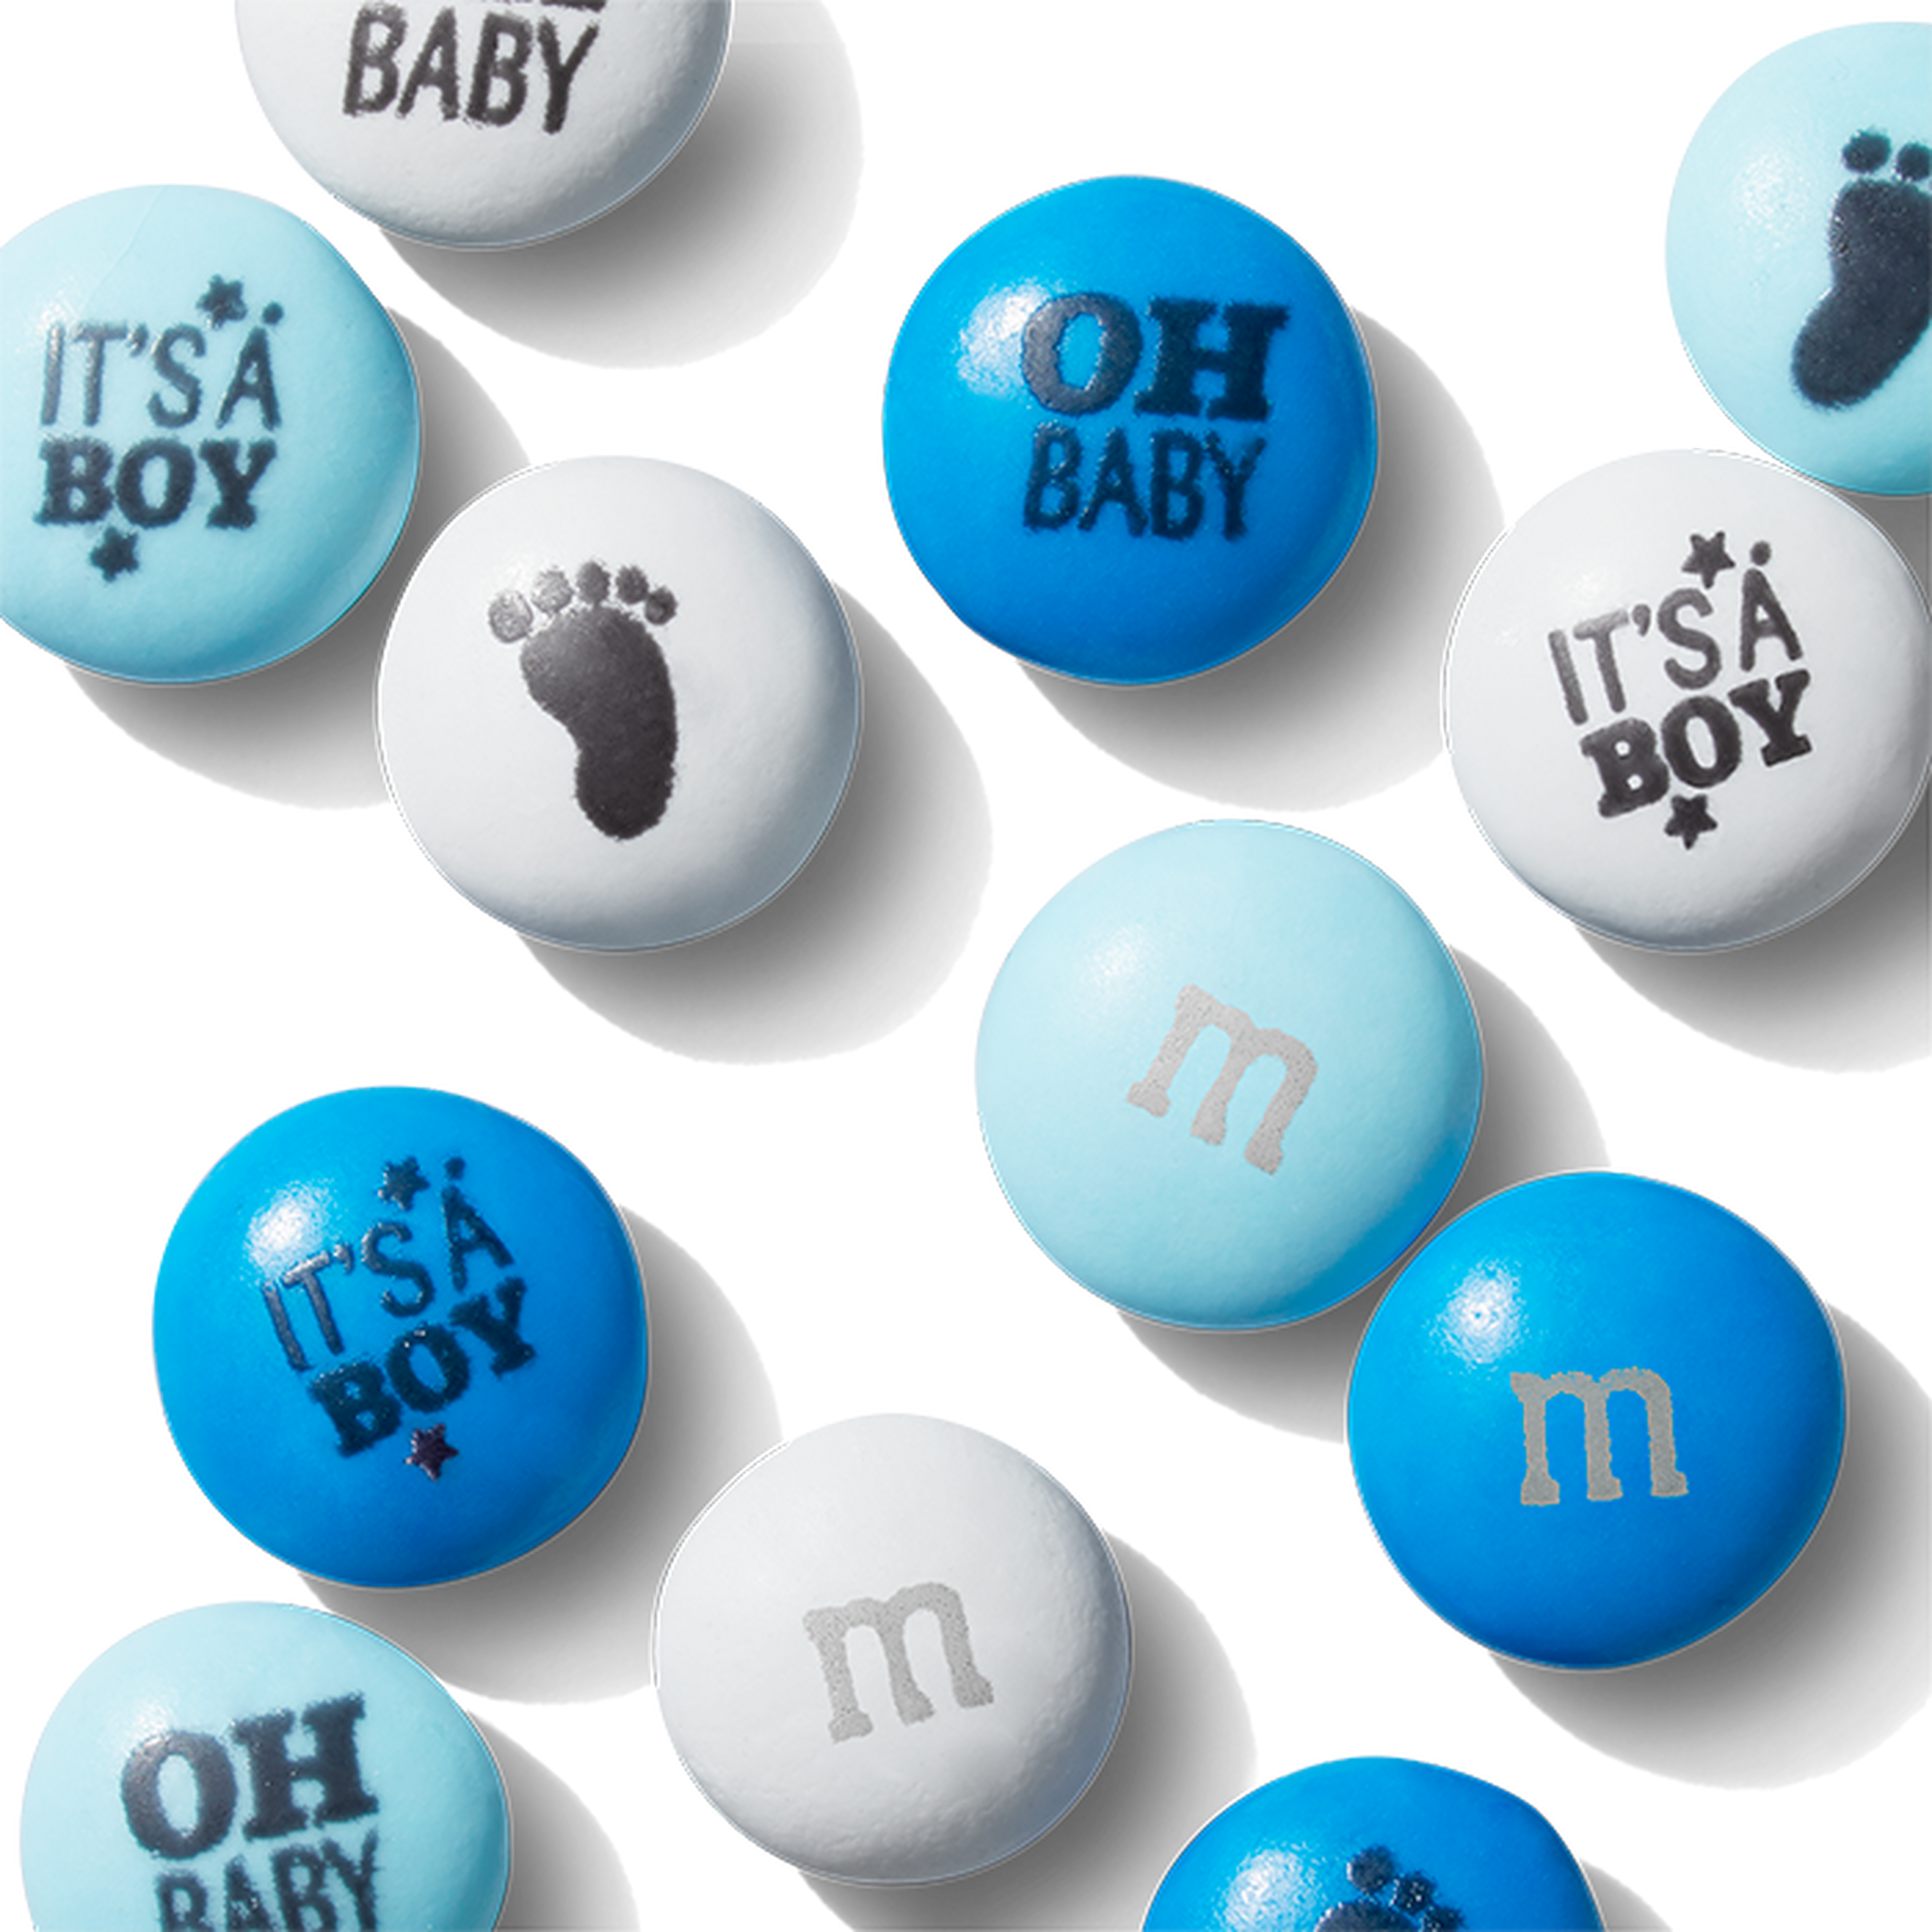 Can You Believe It!? 😍 Unbeatable Baby Shower Presents For Boys